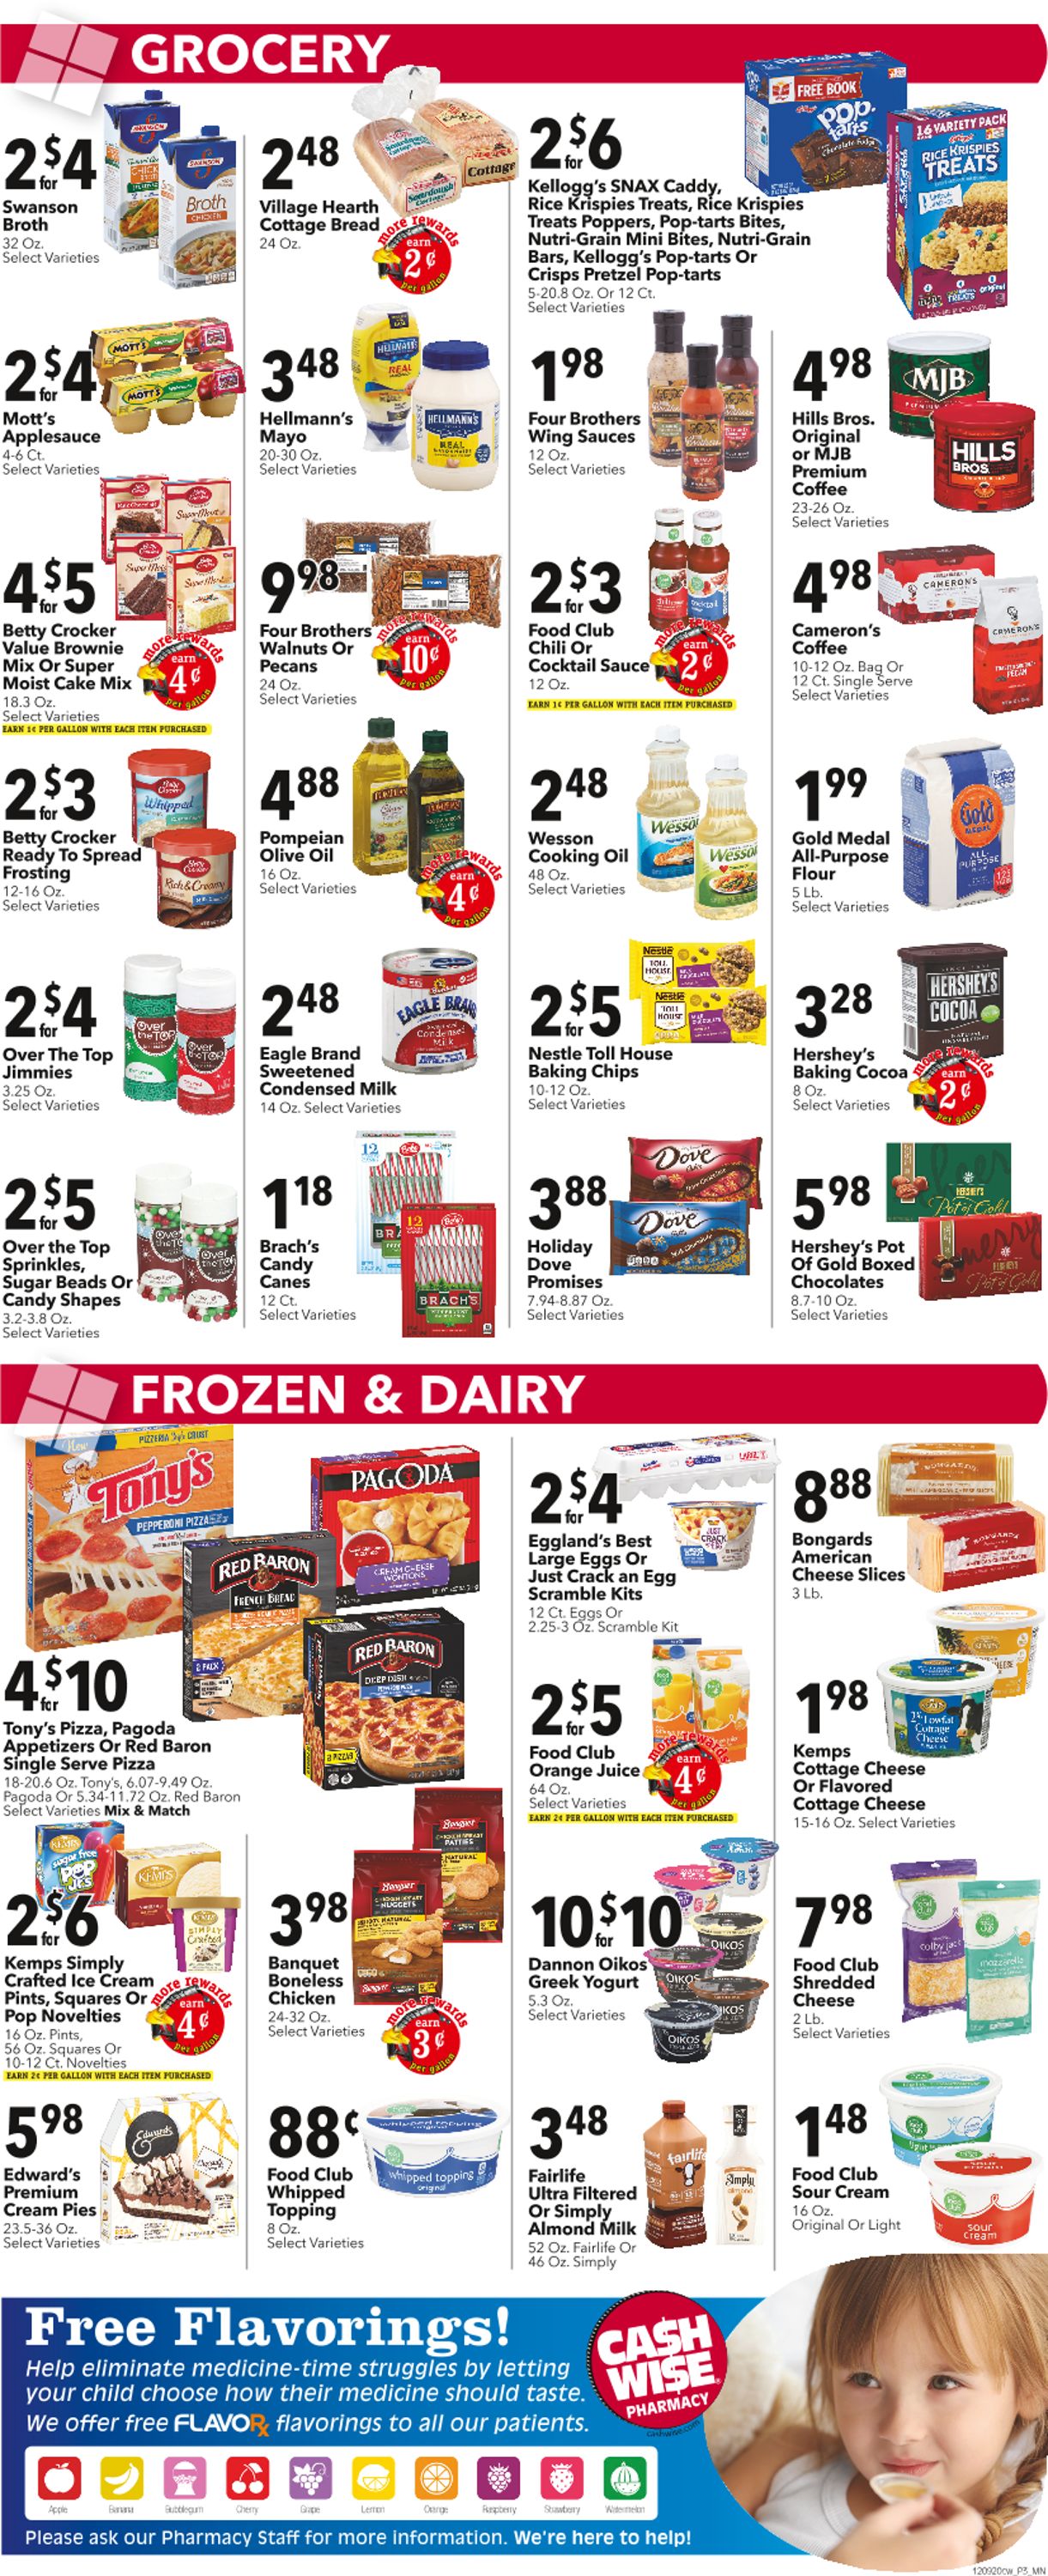 Cash Wise Weekly Ad Circular - valid 12/09-12/15/2020 (Page 3)